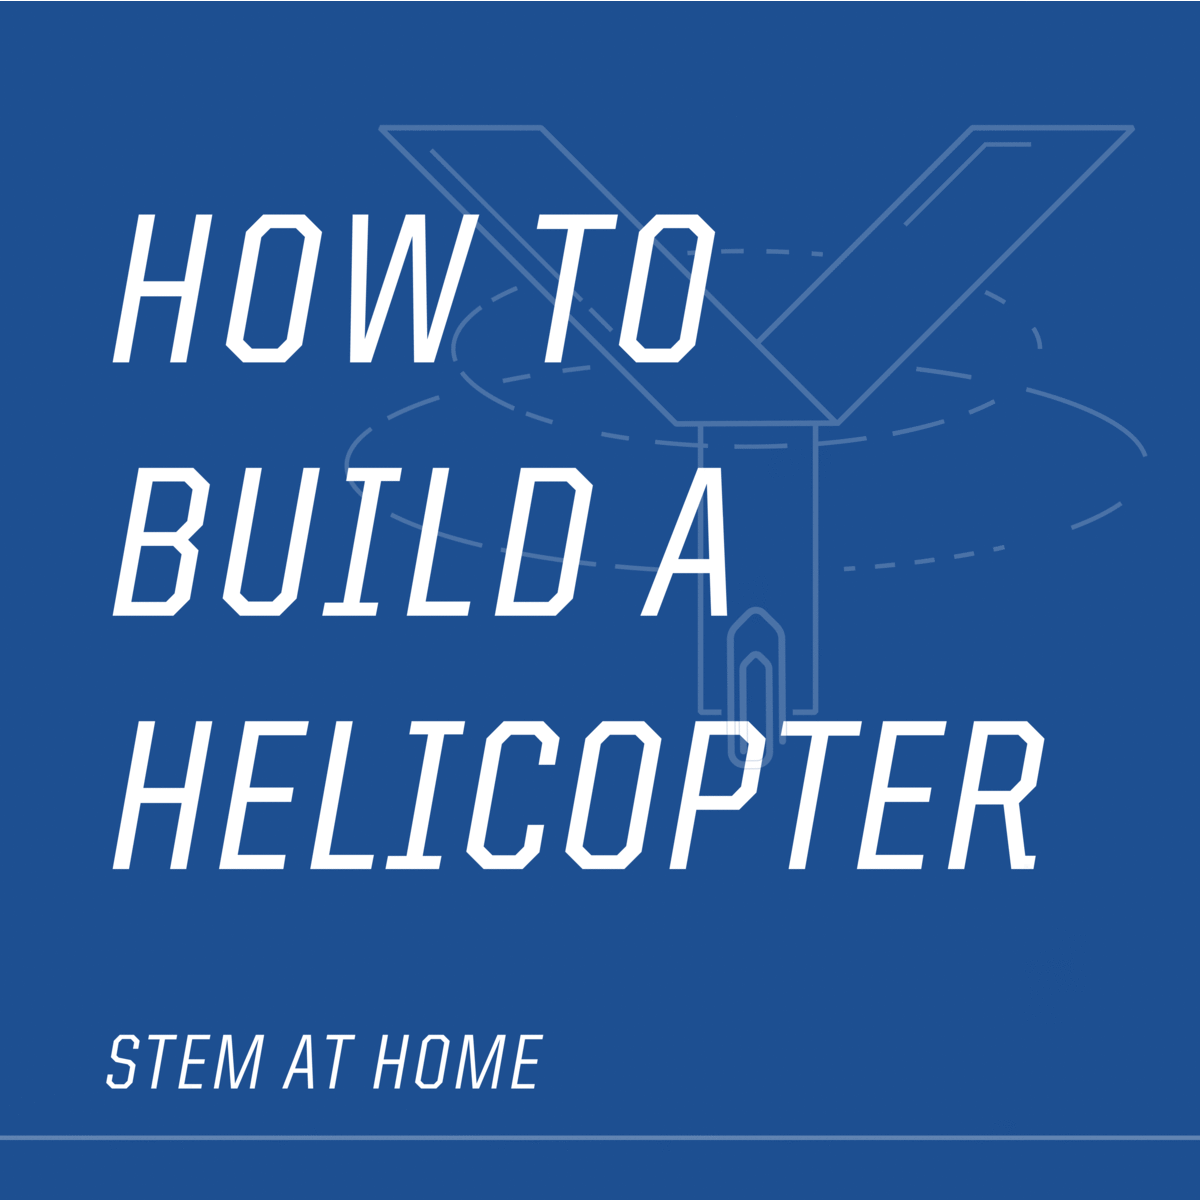 This week with STEM at home, teach the kids how a helicopter works! Tell us what happens if you add more paperclips 😉